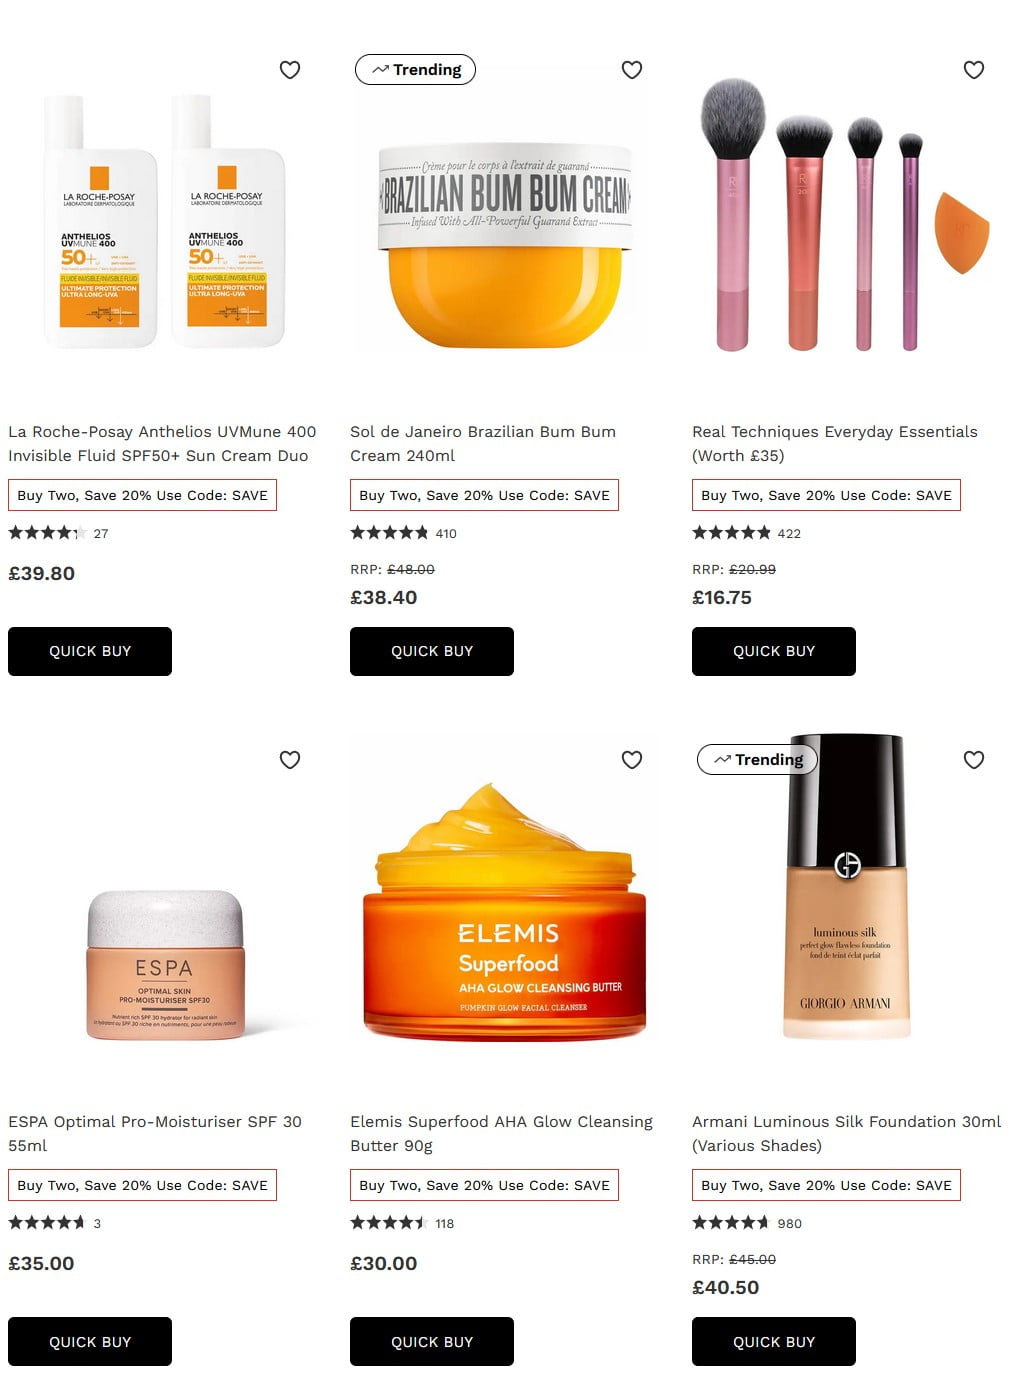 20% off when you purchase two products at Lookfantastic